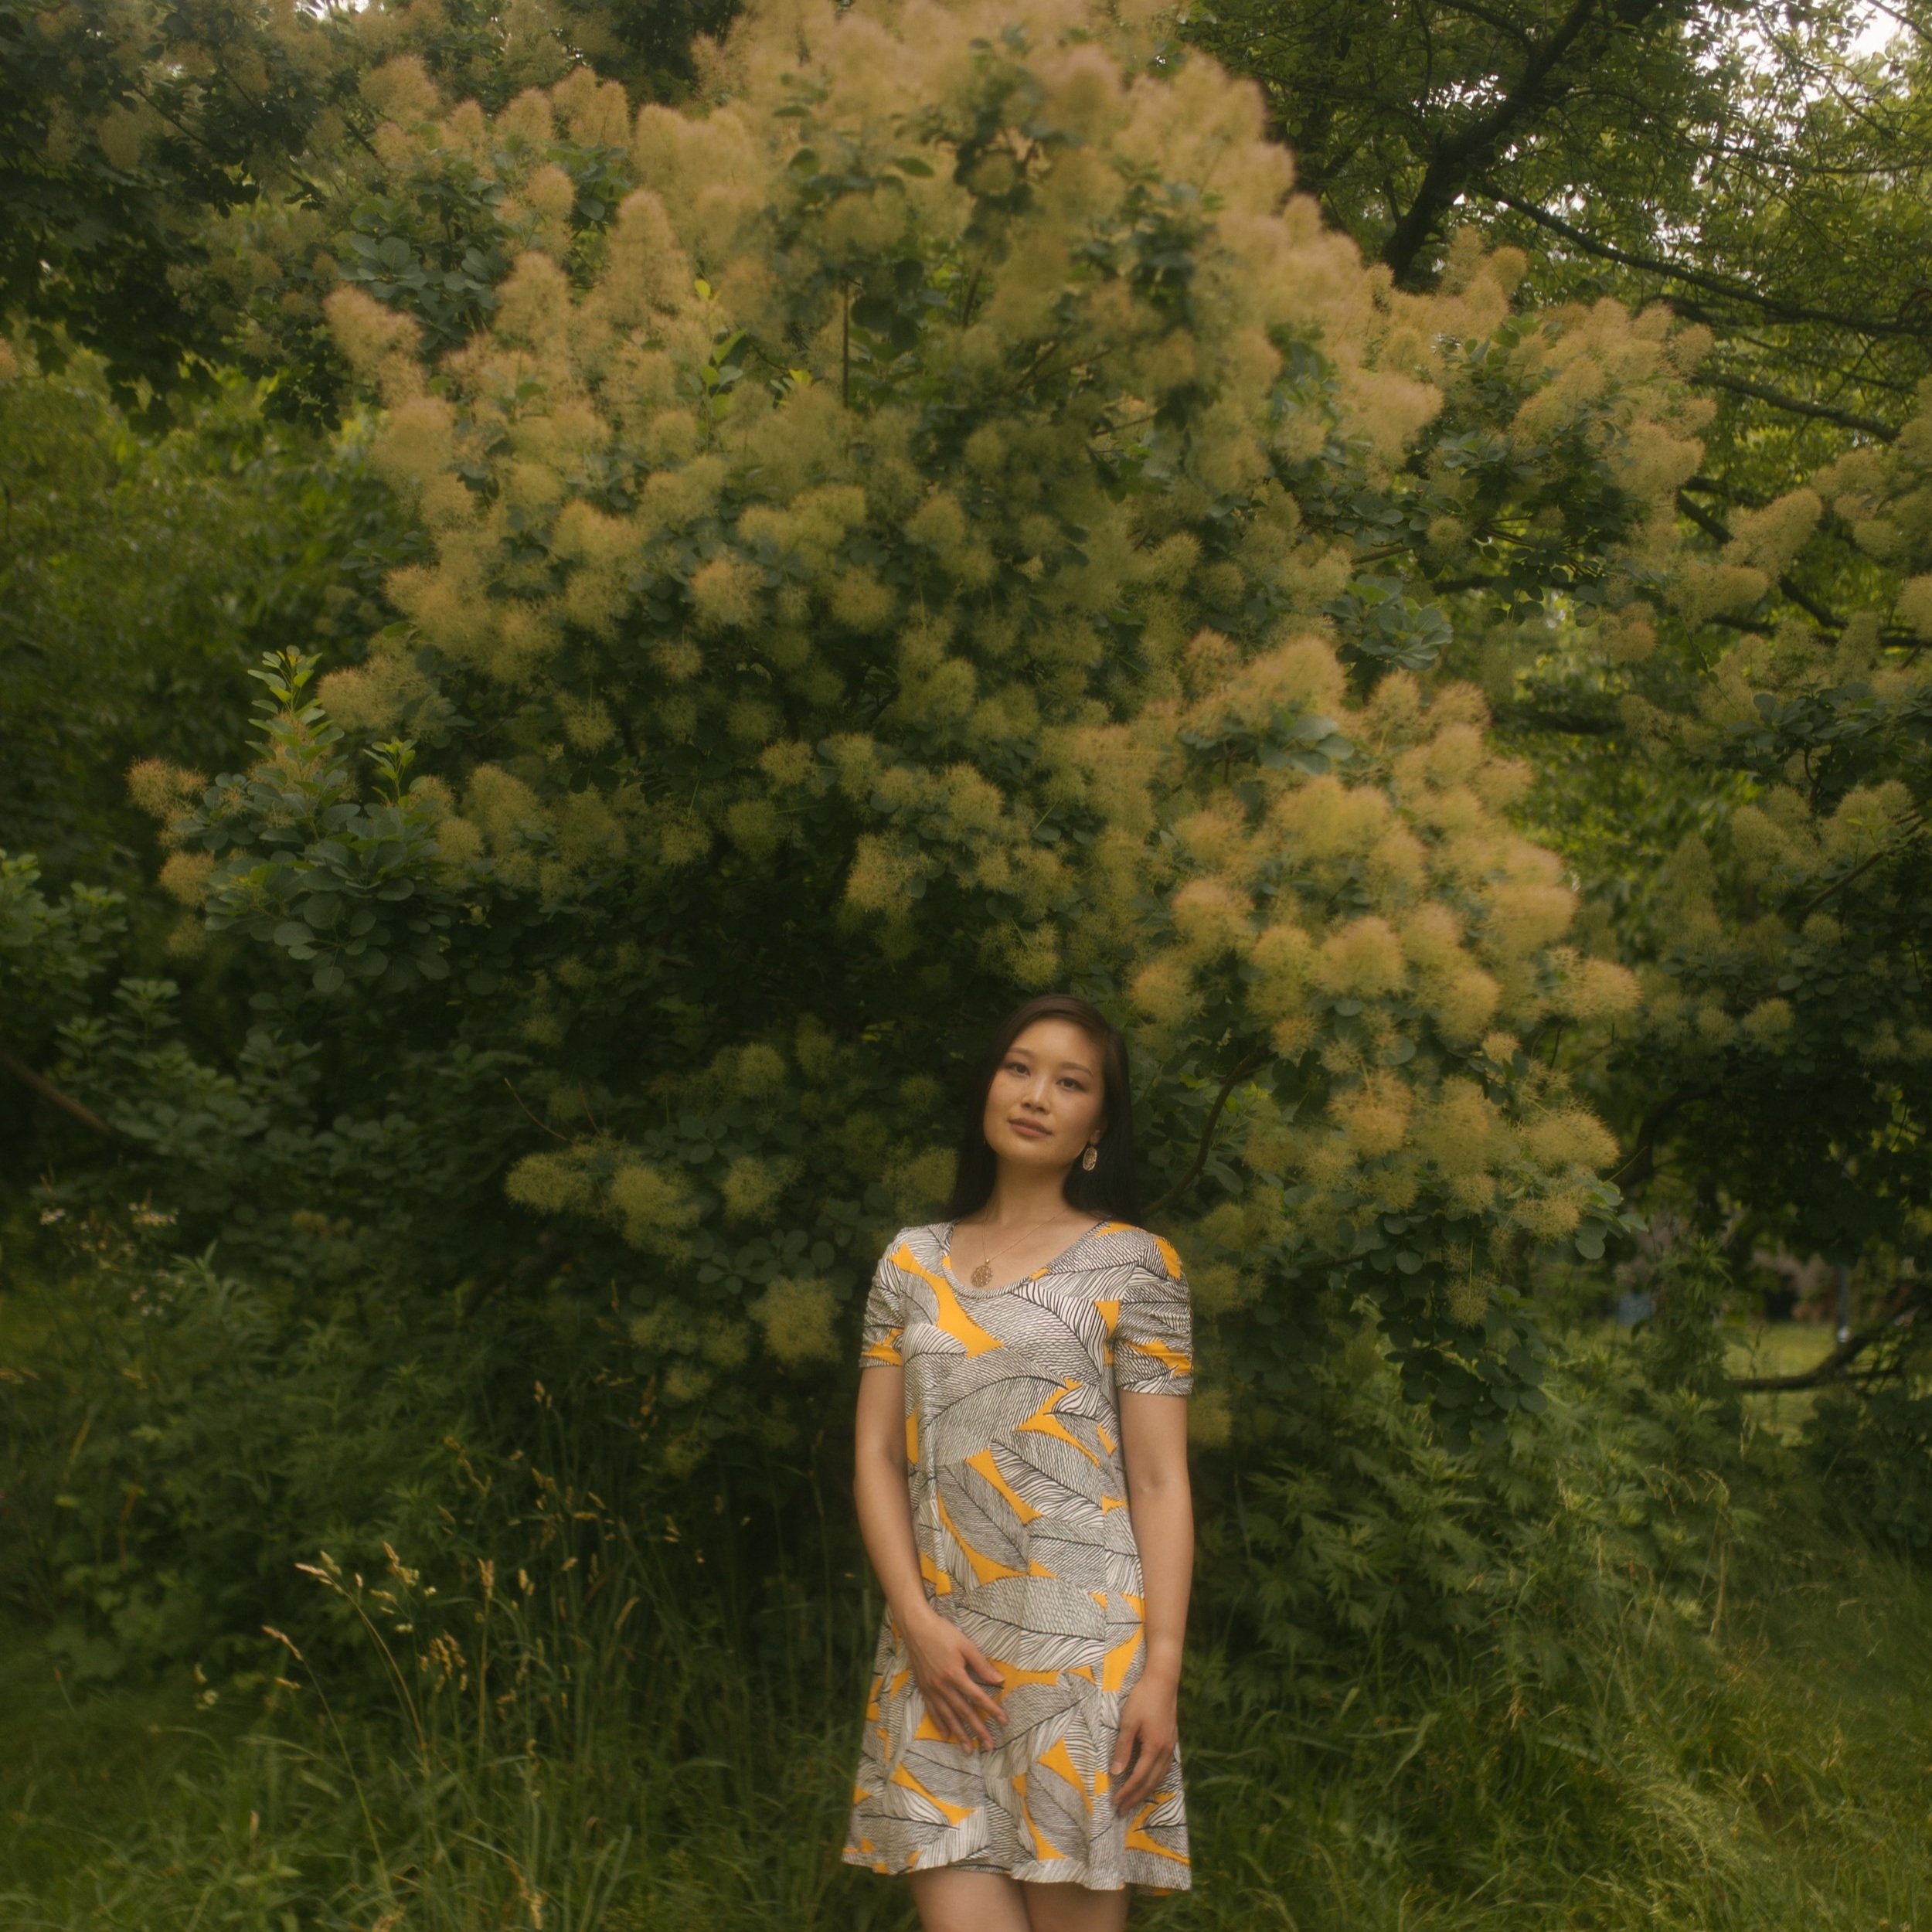 Jessica Hwang standing in a dress in front of a large tree with yellow flowers